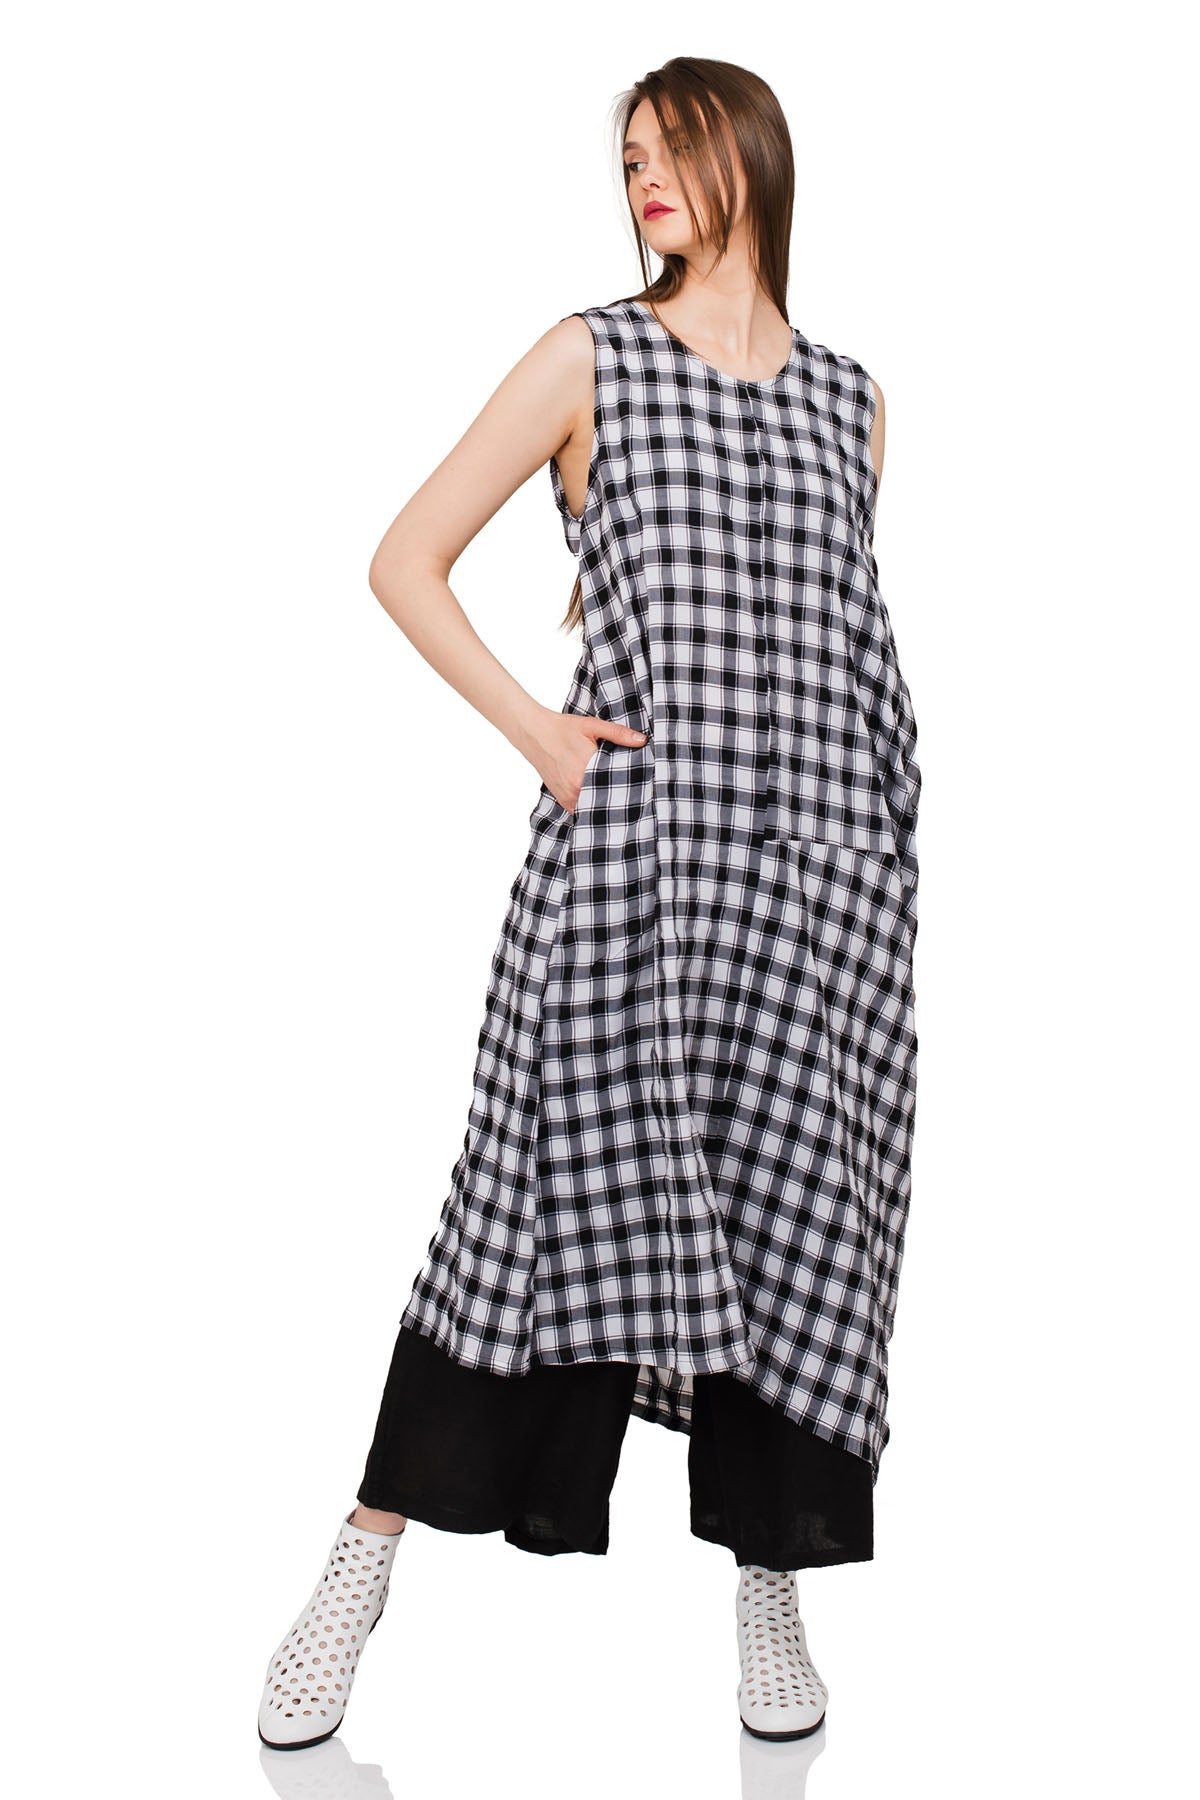 Chic & Simple Kali Dress - Black and White Check